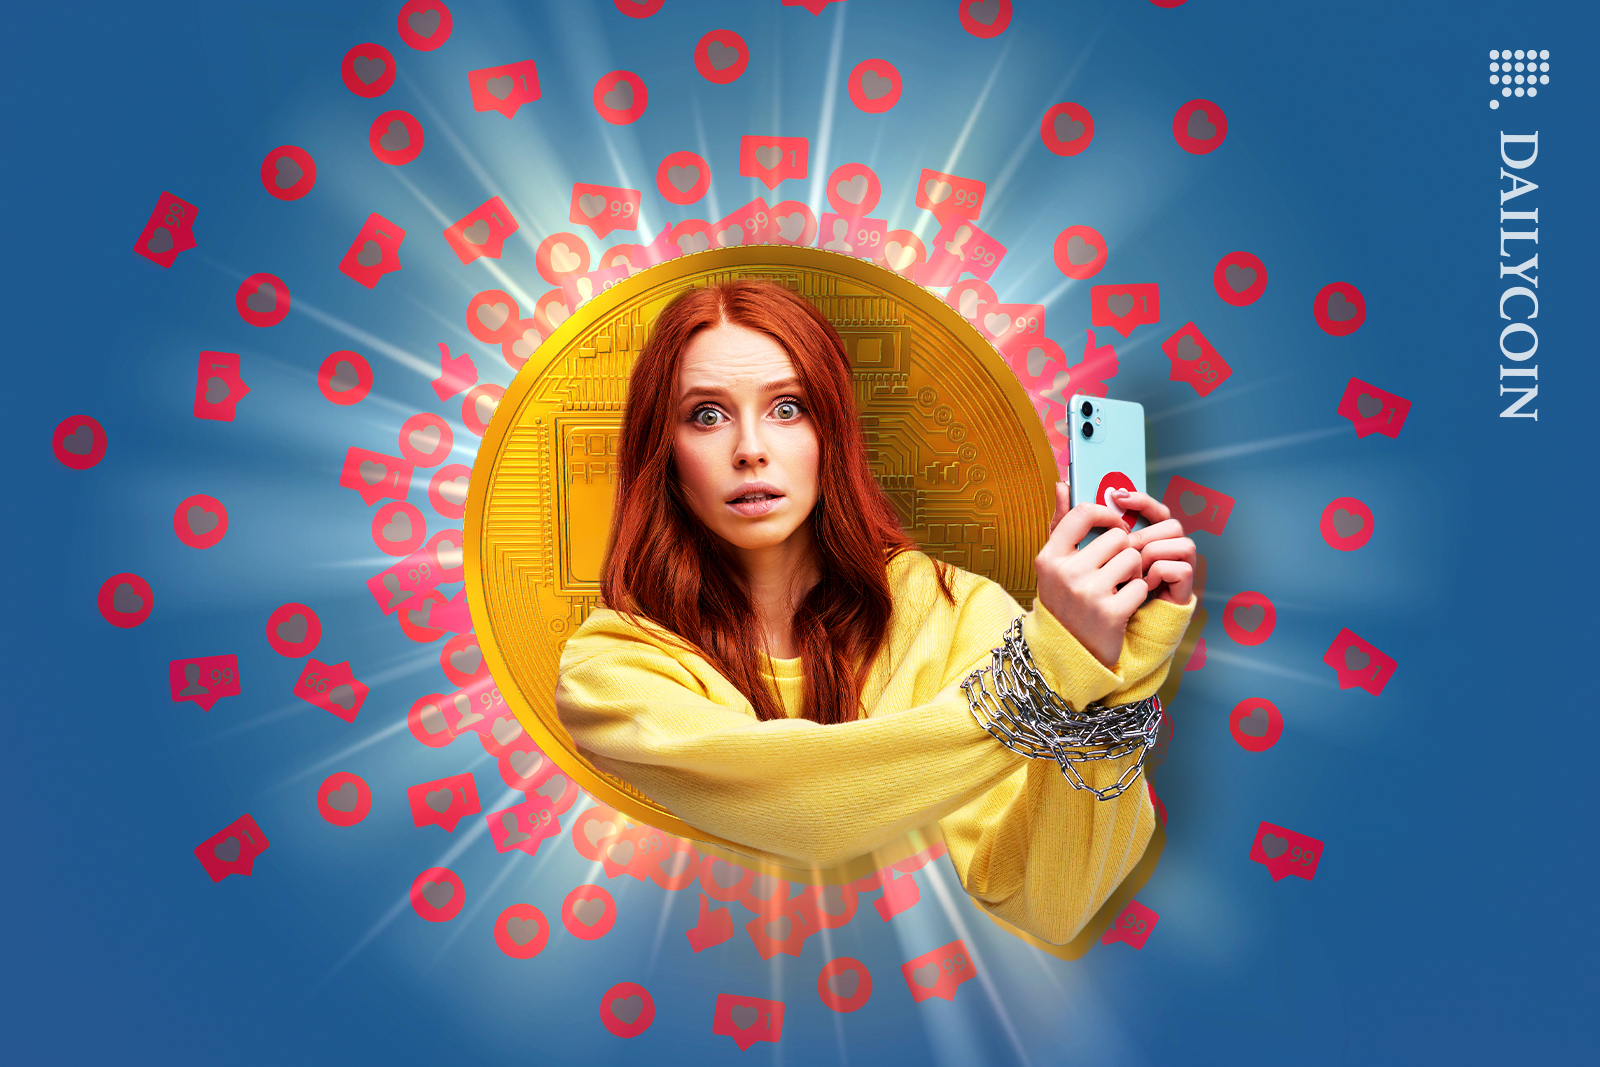 Social media girl with her hands tied holding a phone, crypto coin behind her.